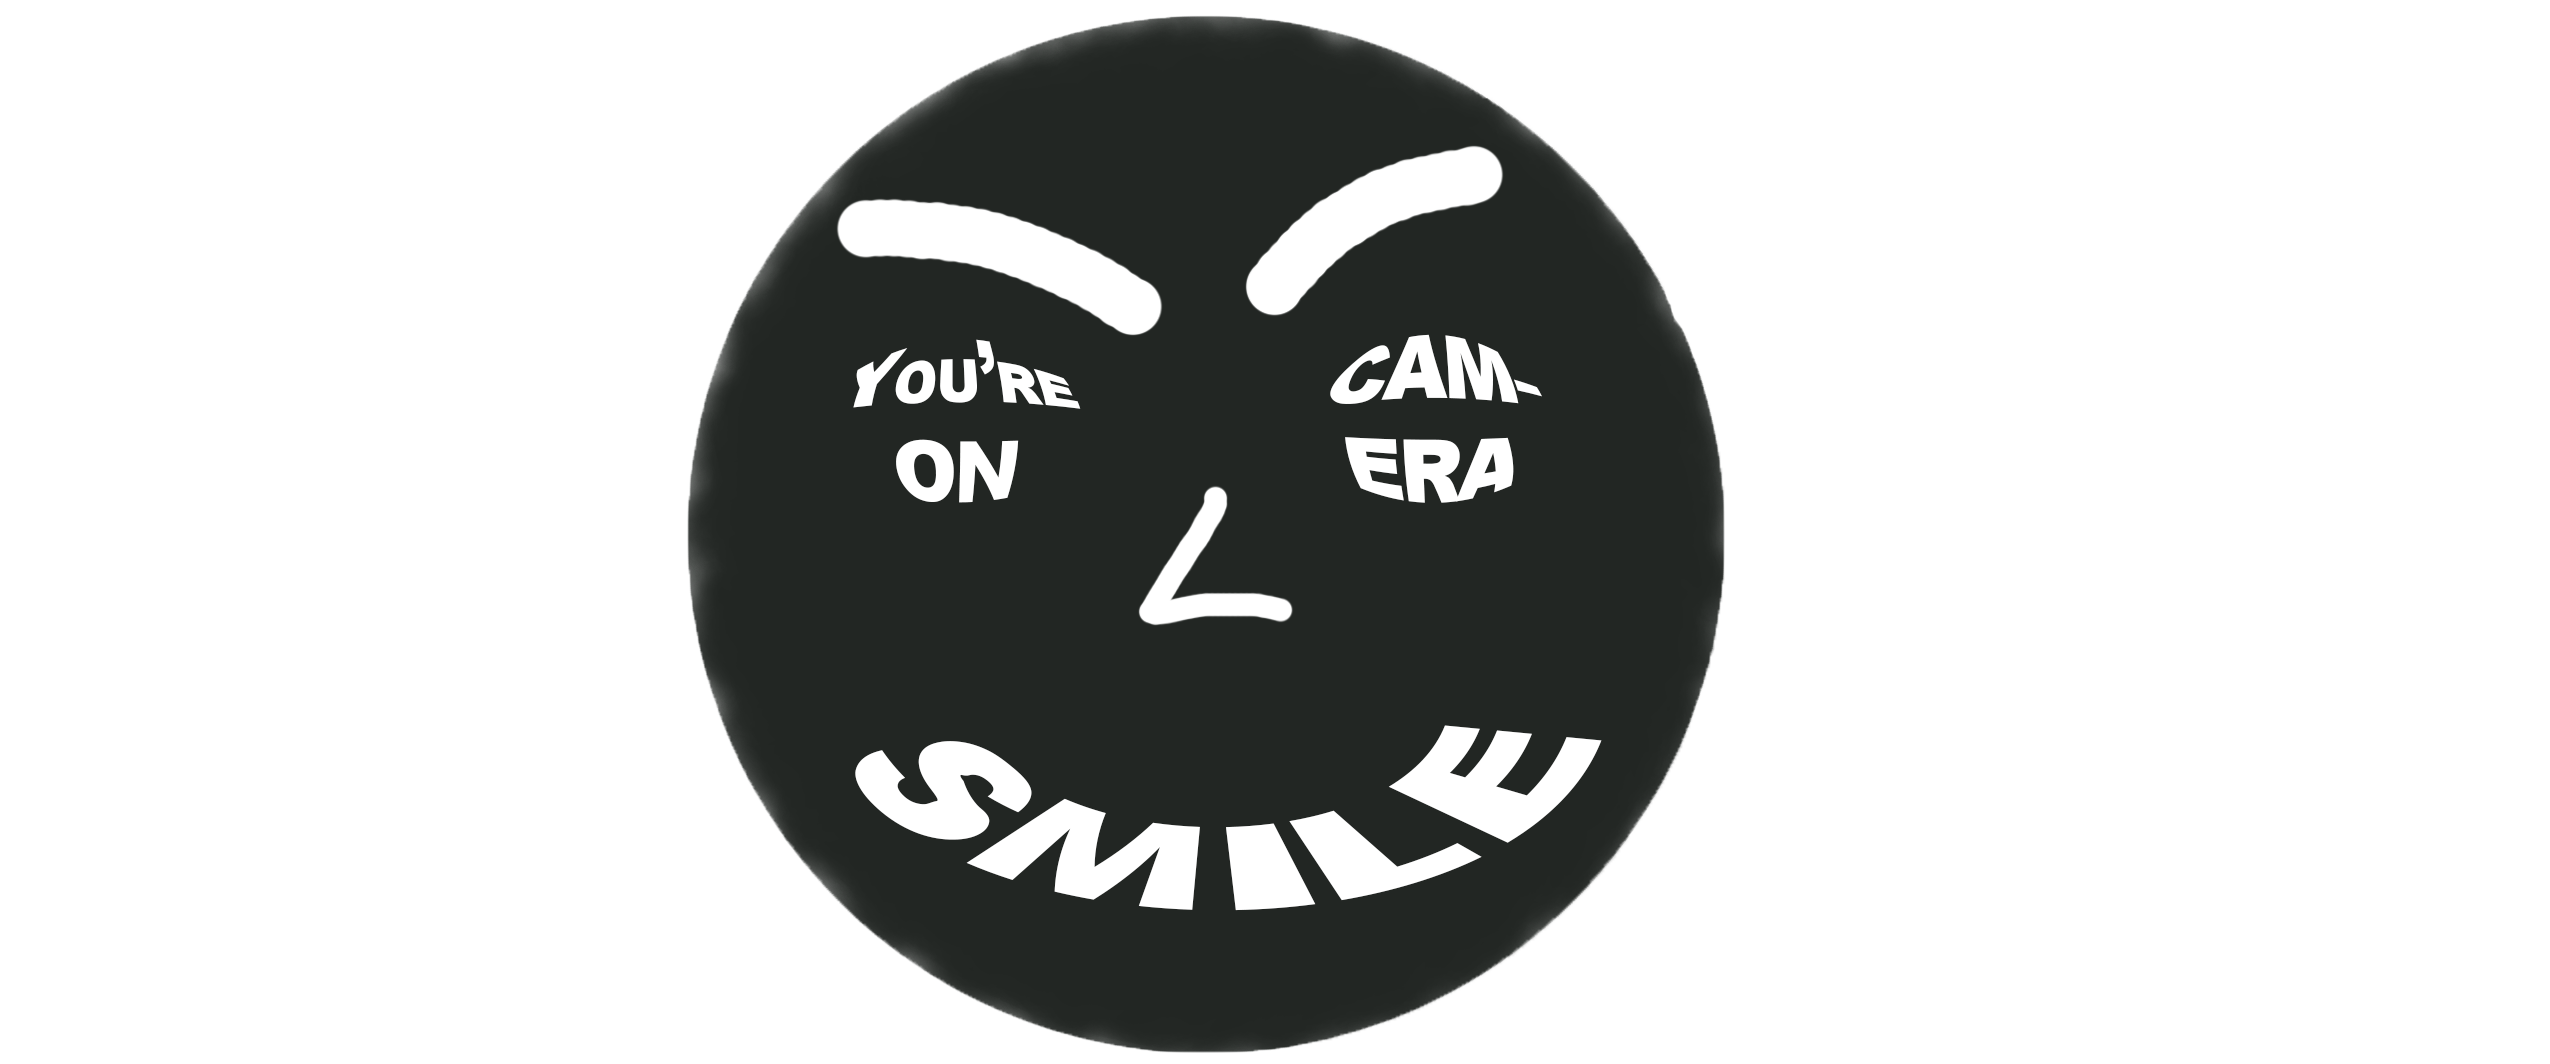 #Smile You're On Camera